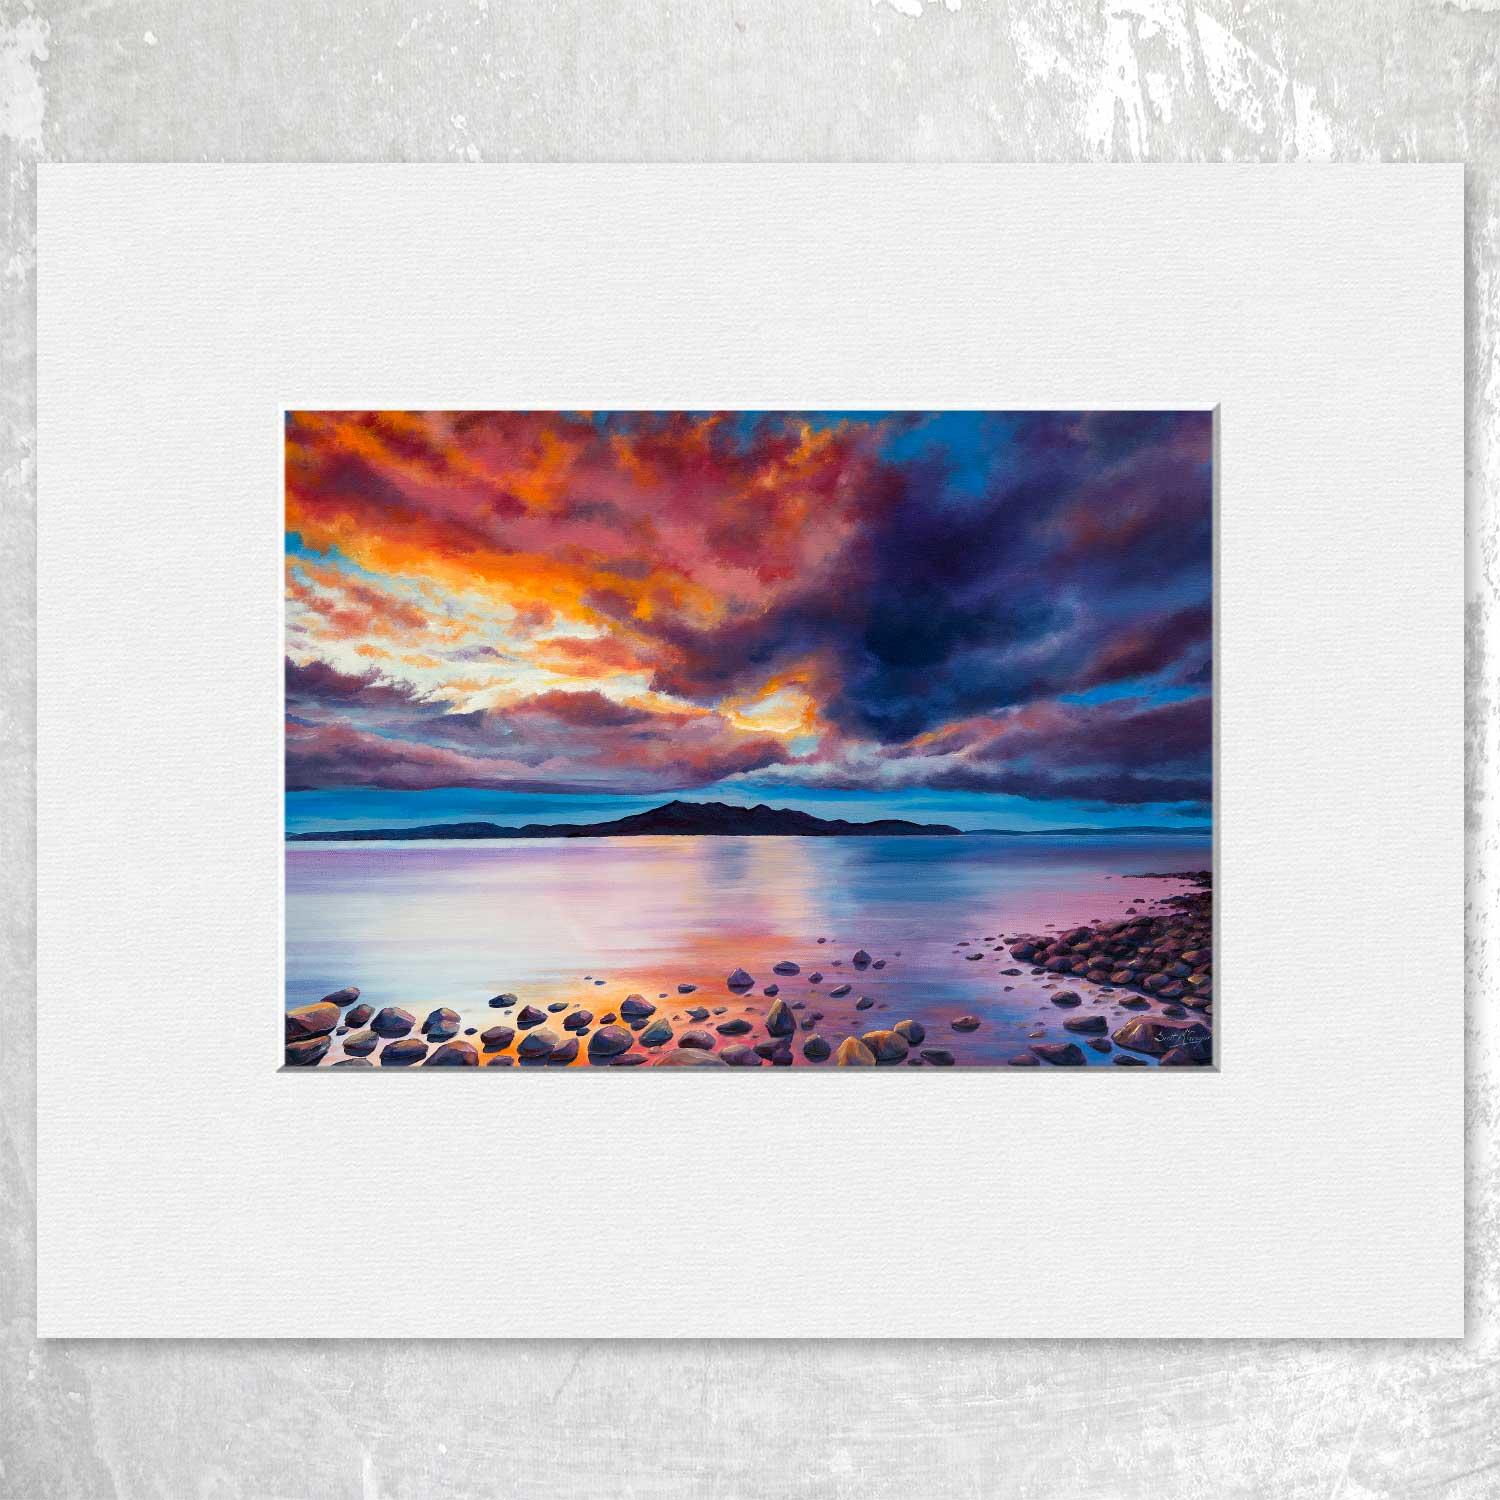 Dusky Twilight Mounted Card from an original painting by artist Scott McGregor